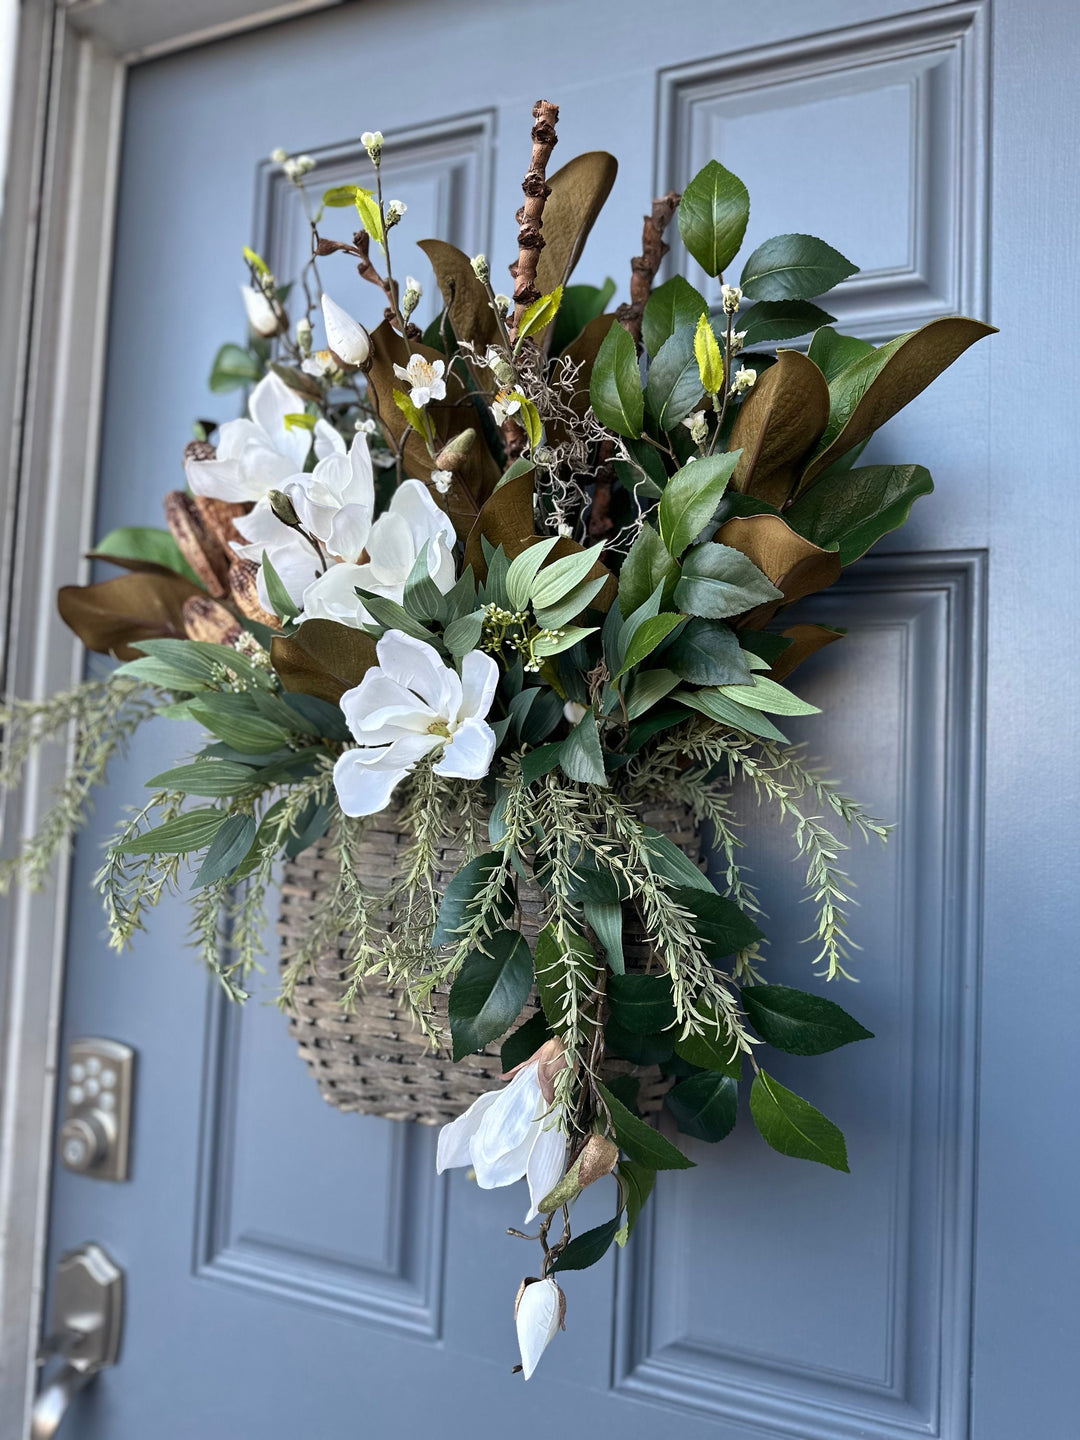 Basket for front door arrangement with magnolia florals and greenery with a touch of natural branches and pods 24"x21"x5. Matches wreath!!!